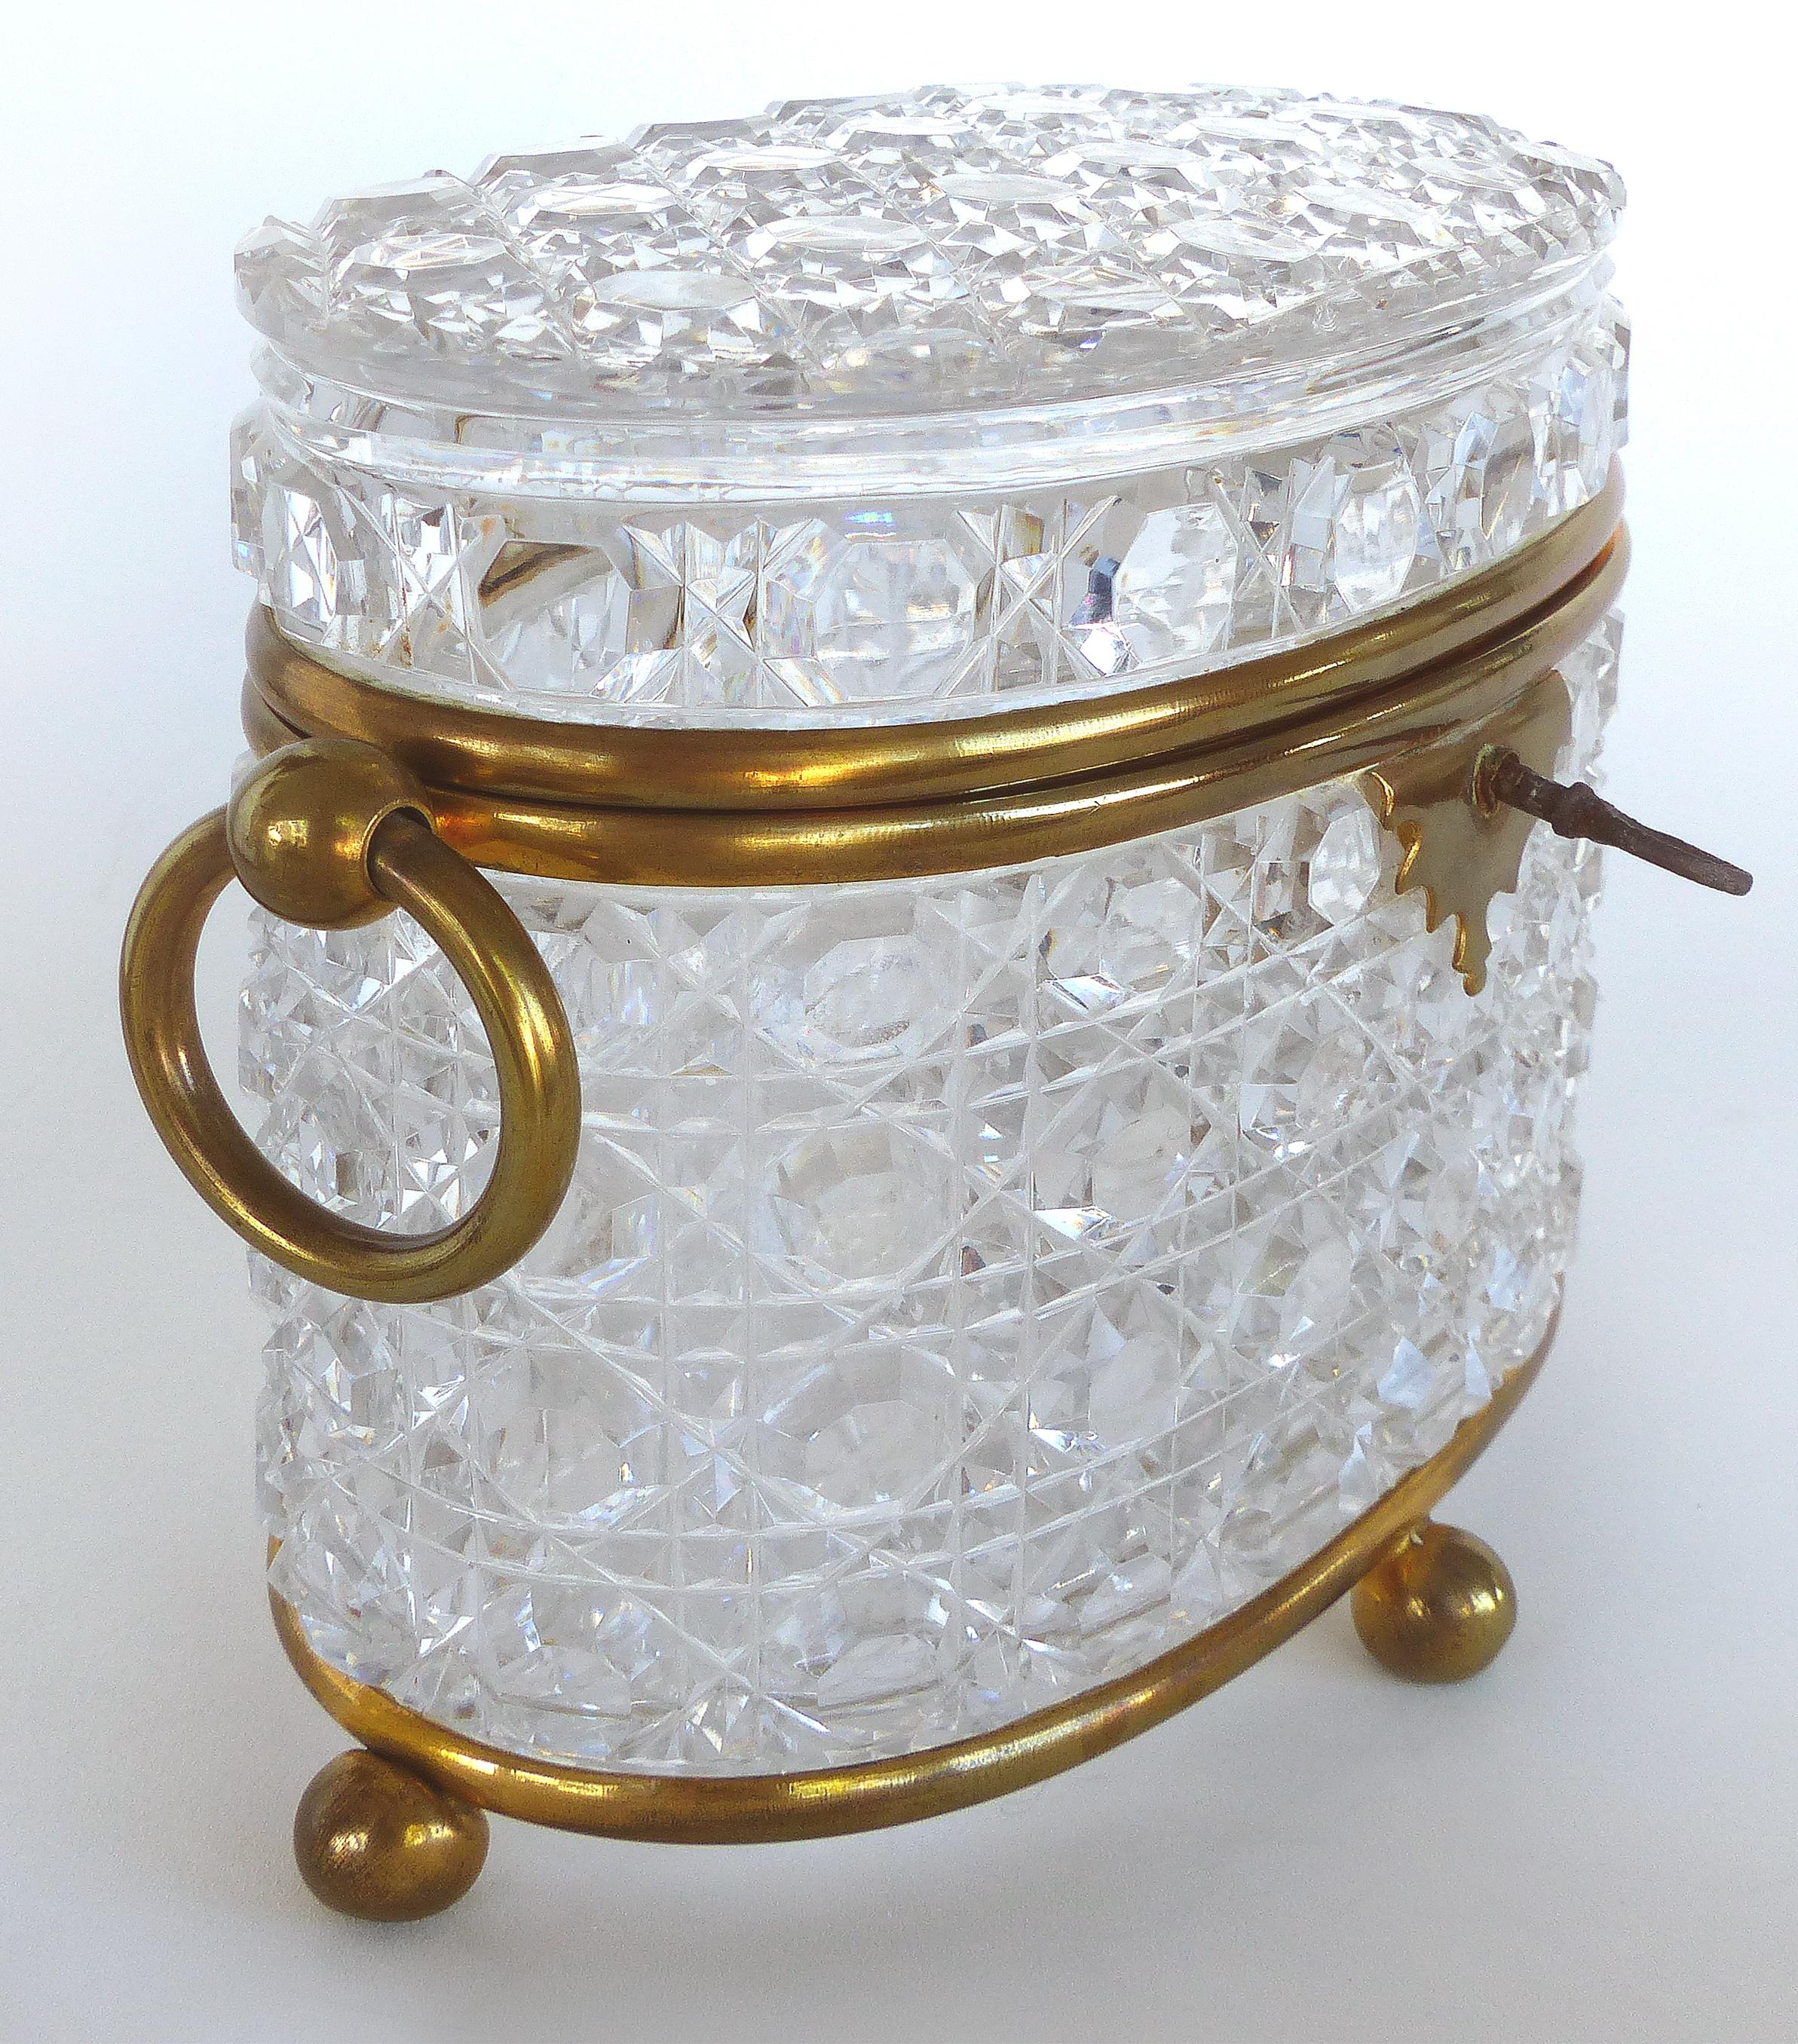 20th Century Antique Baccarat Cut Crystal Bronze Mounted Footed Oval Box with Original Key